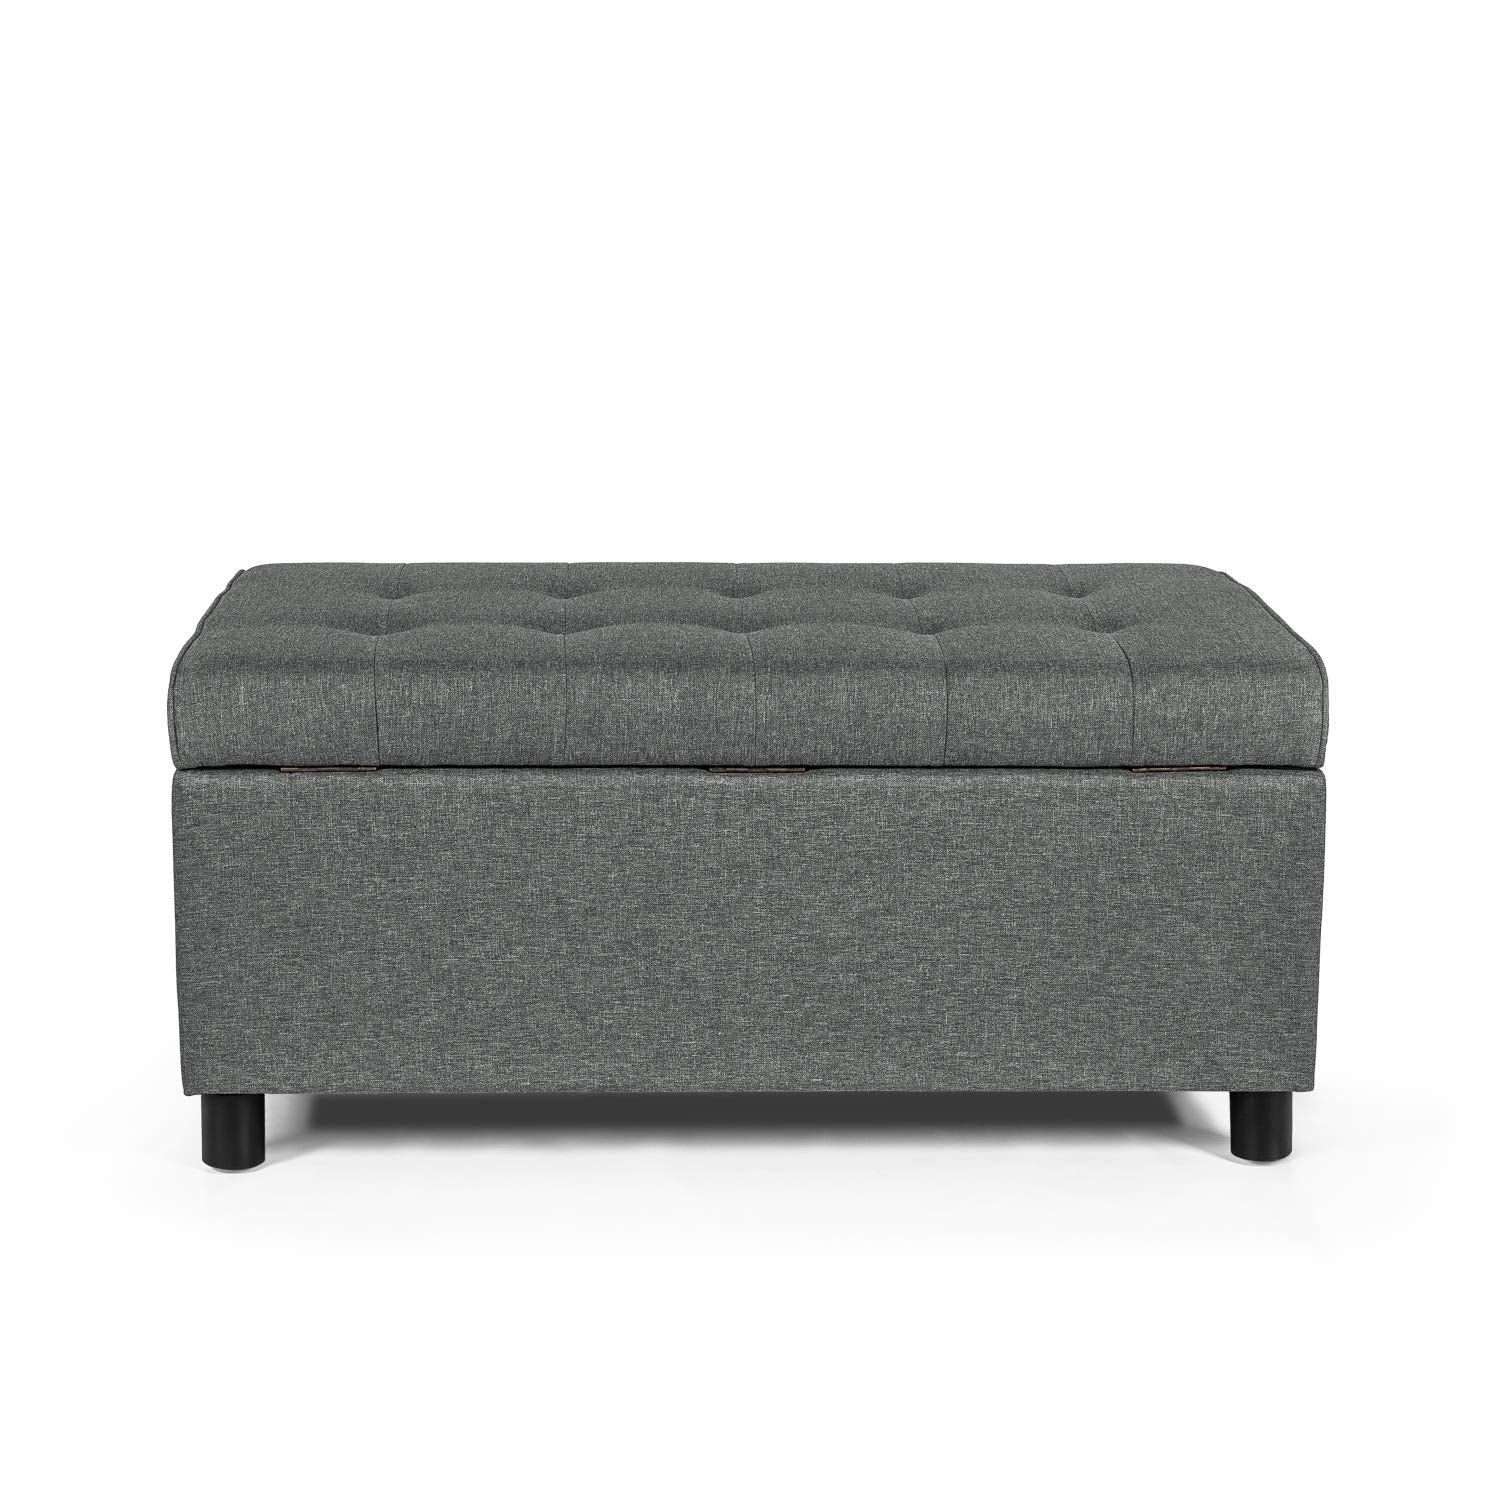 Adeco Classic Rectangular Tufted Fabric Ottoman Bench With Large Storage